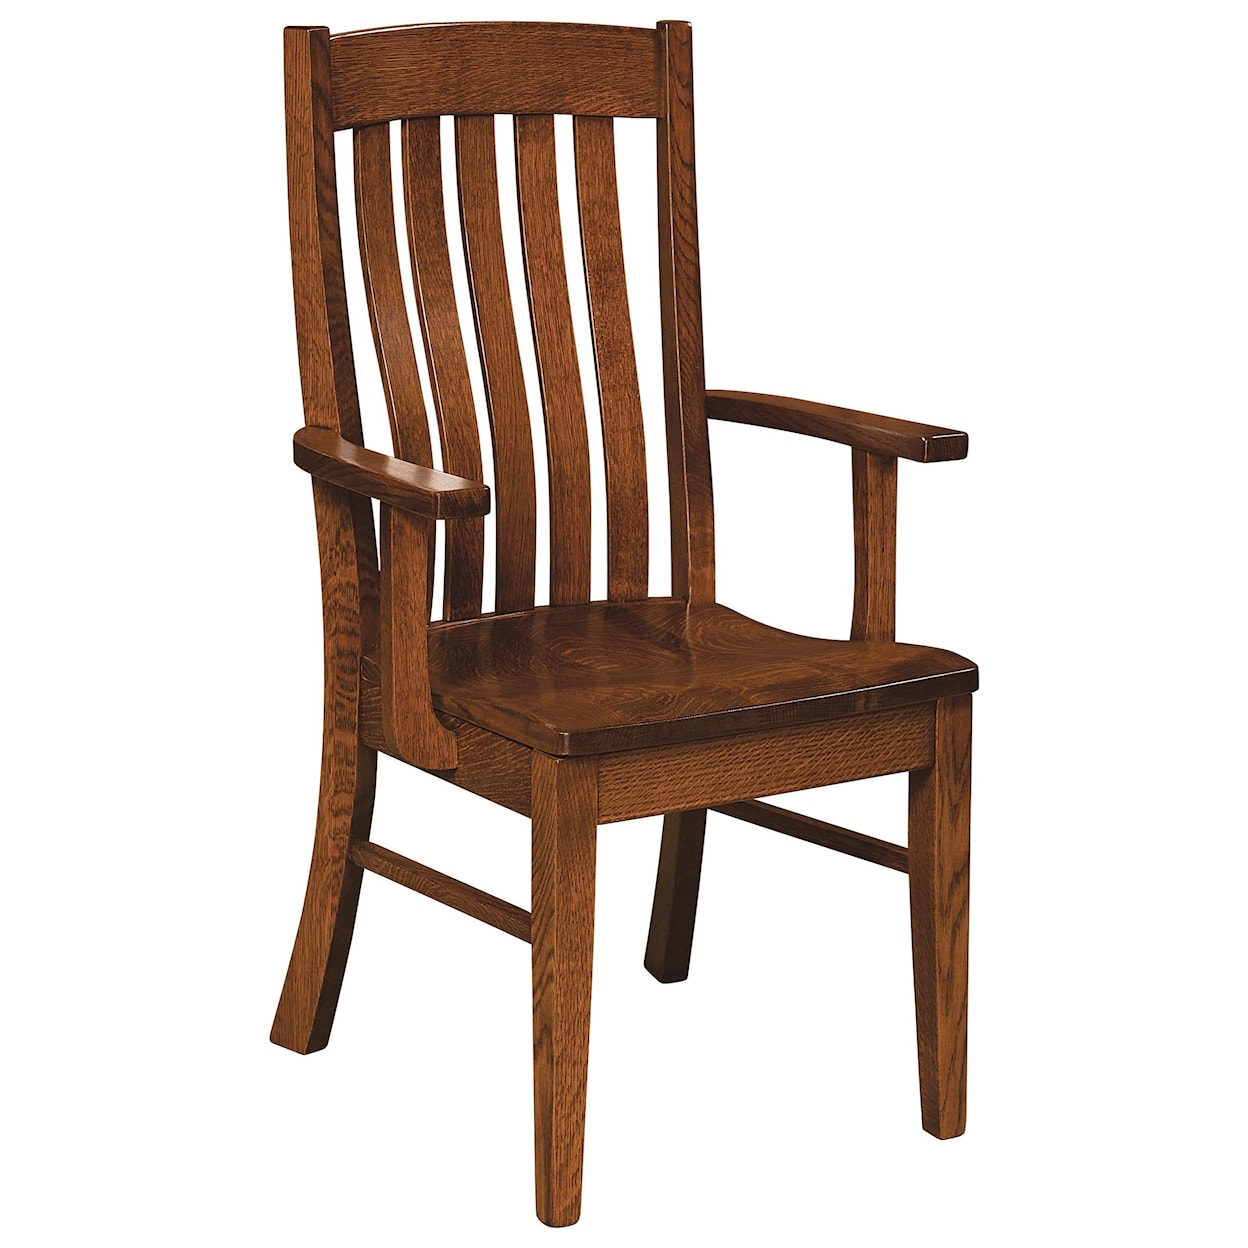 F&N Woodworking Houghton Arm Chair - Fabric Seat